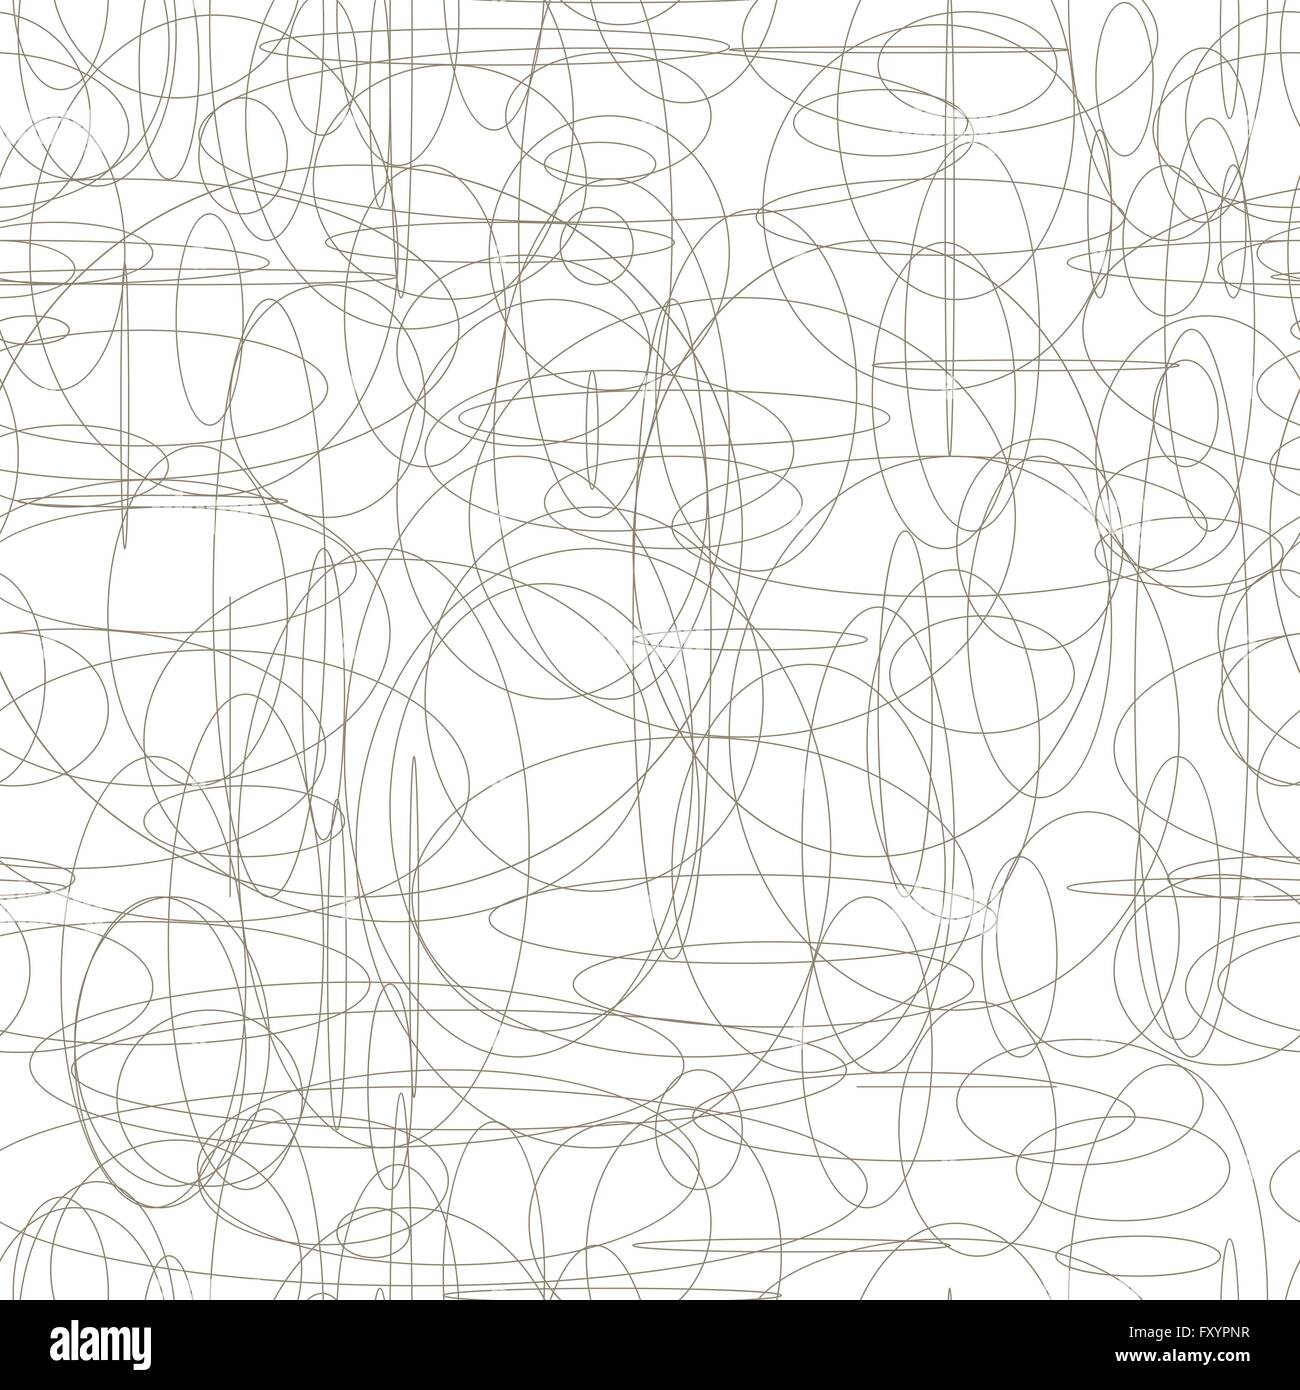 Abstract diverso vettore seamless pattern. illustrazione vettoriale Illustrazione Vettoriale